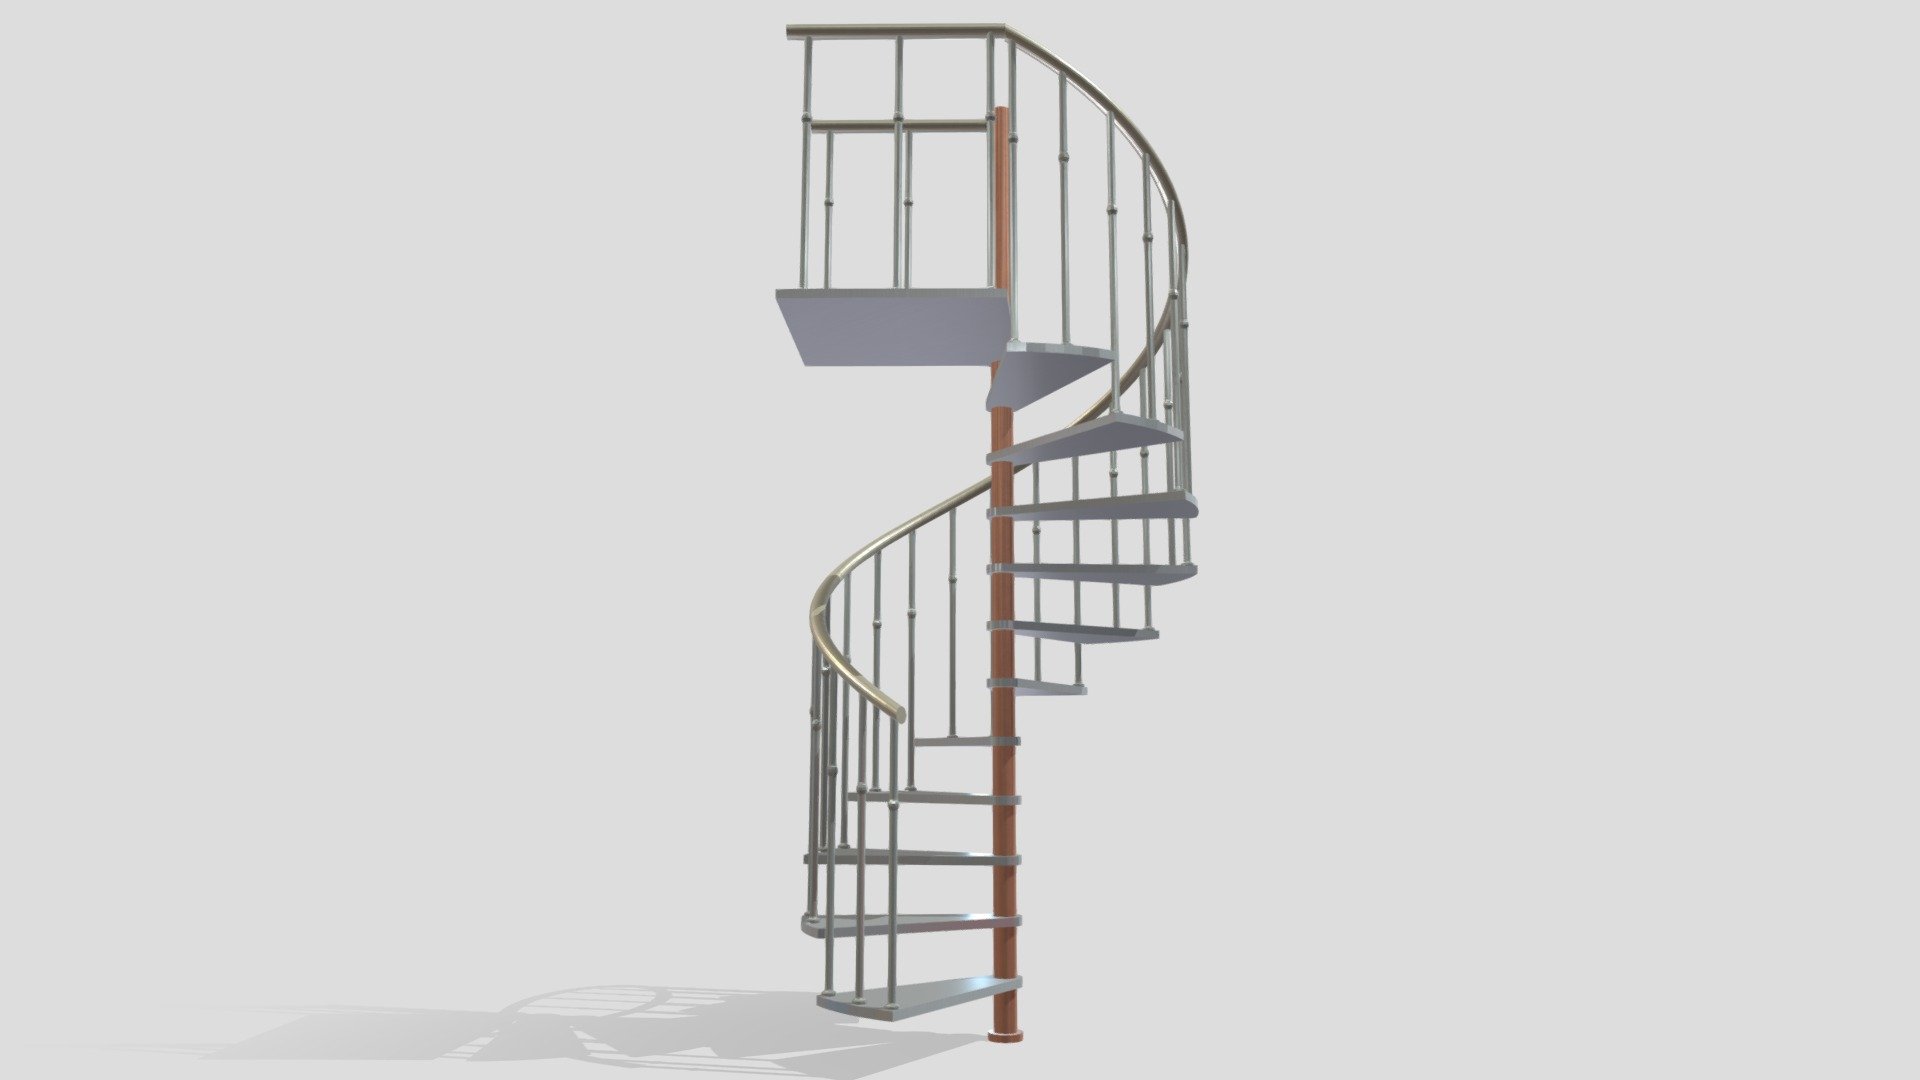 The staircase is a 55-inch diameter. It is designed to handle high traffic areas. The 11 treads plus additional landing platform provide a comfortable walking space while the single railing with continuous steel handrail ensures safe access up and down the staircase 3d model